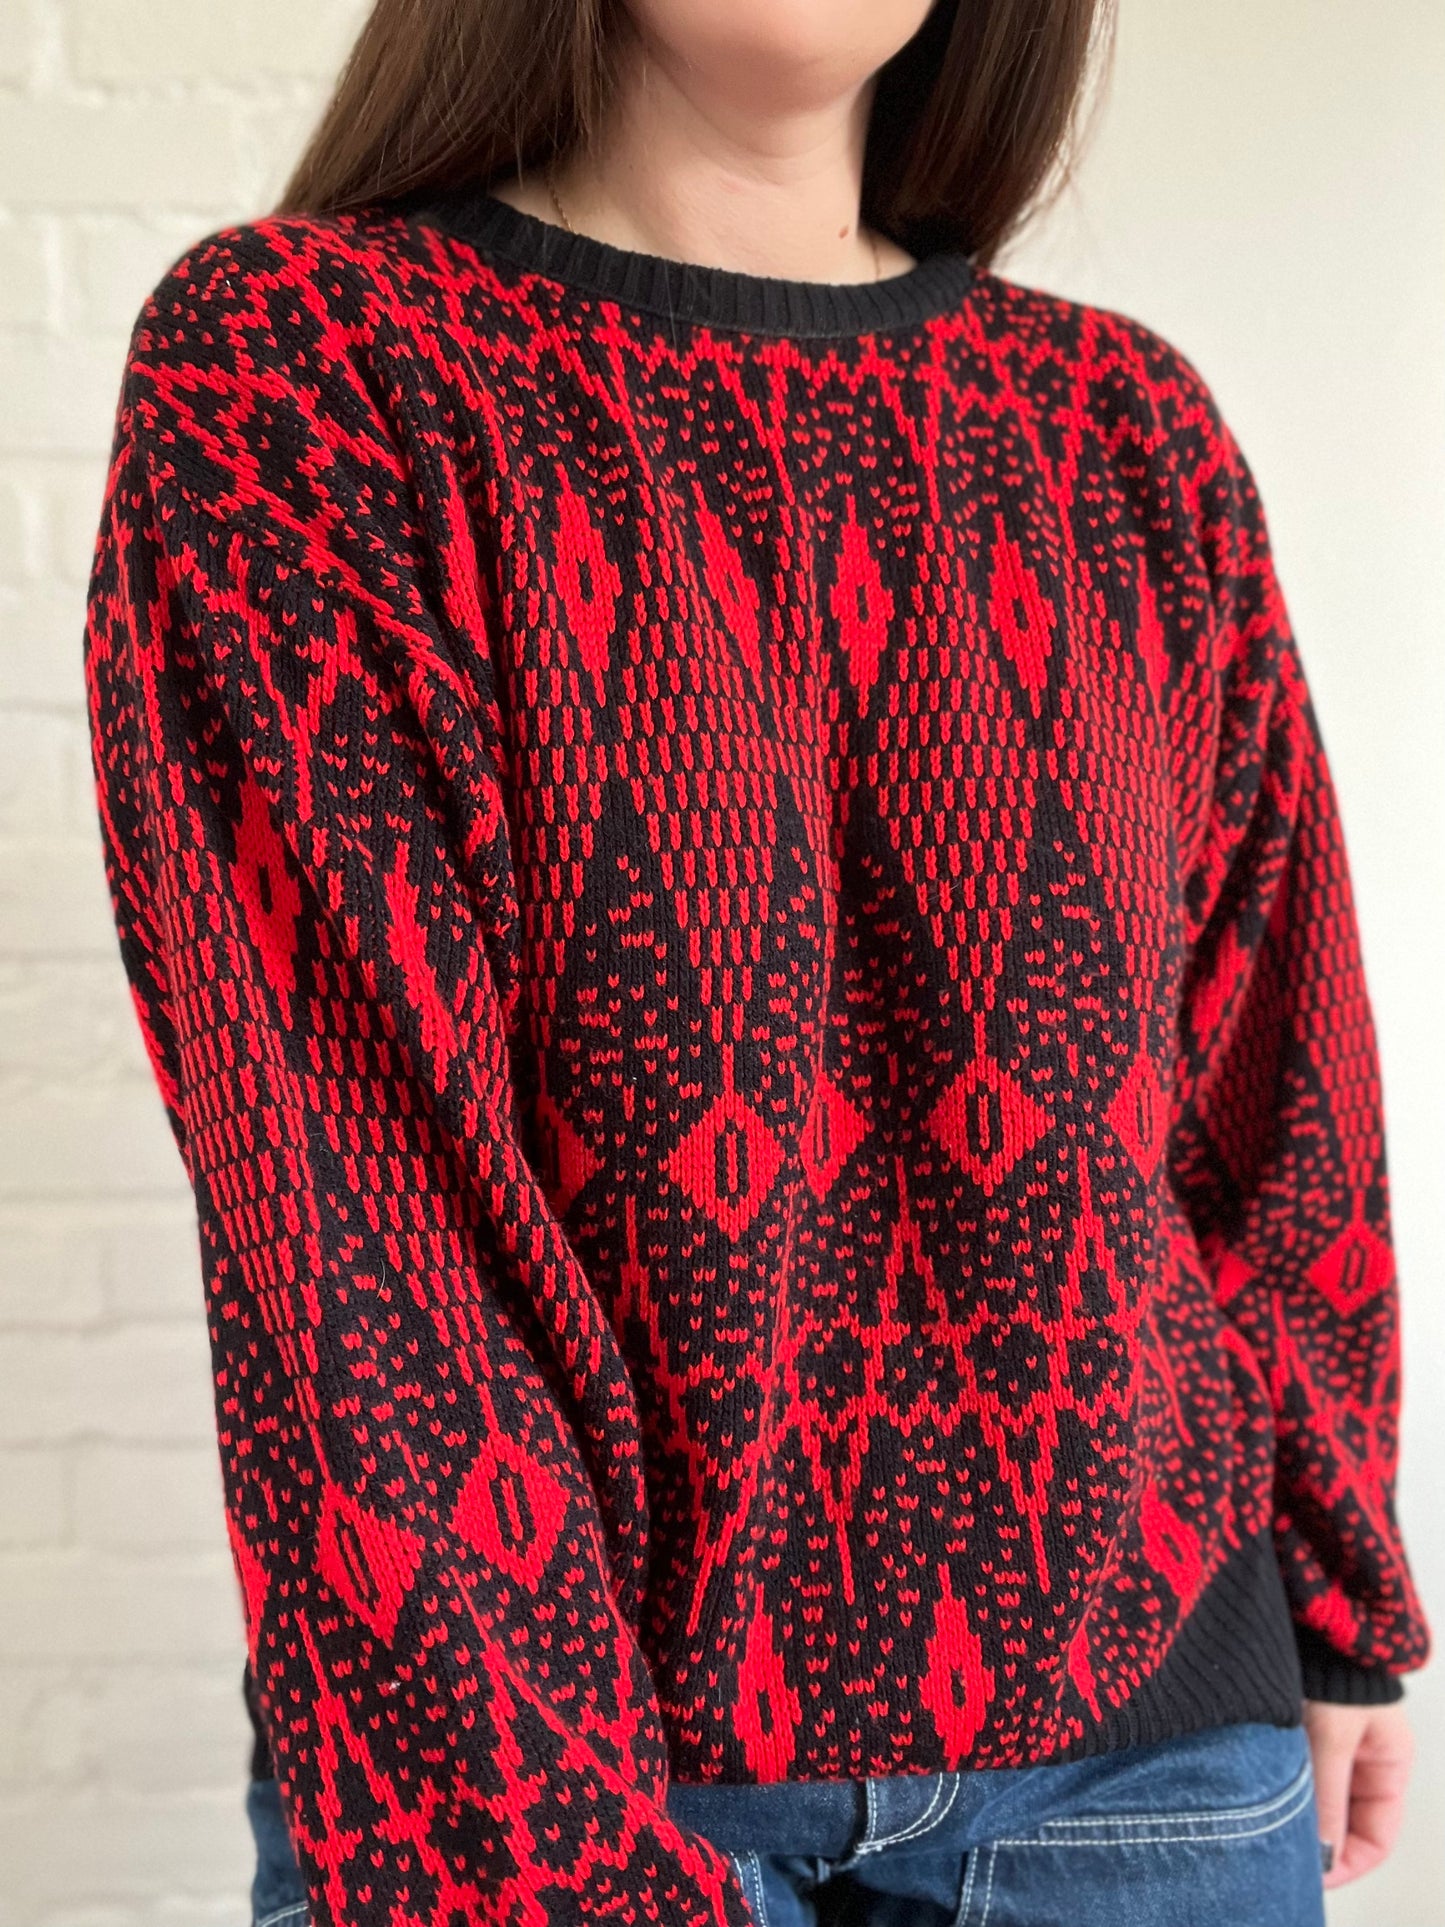 Black & Red Abstract Sweater - Size L/XL